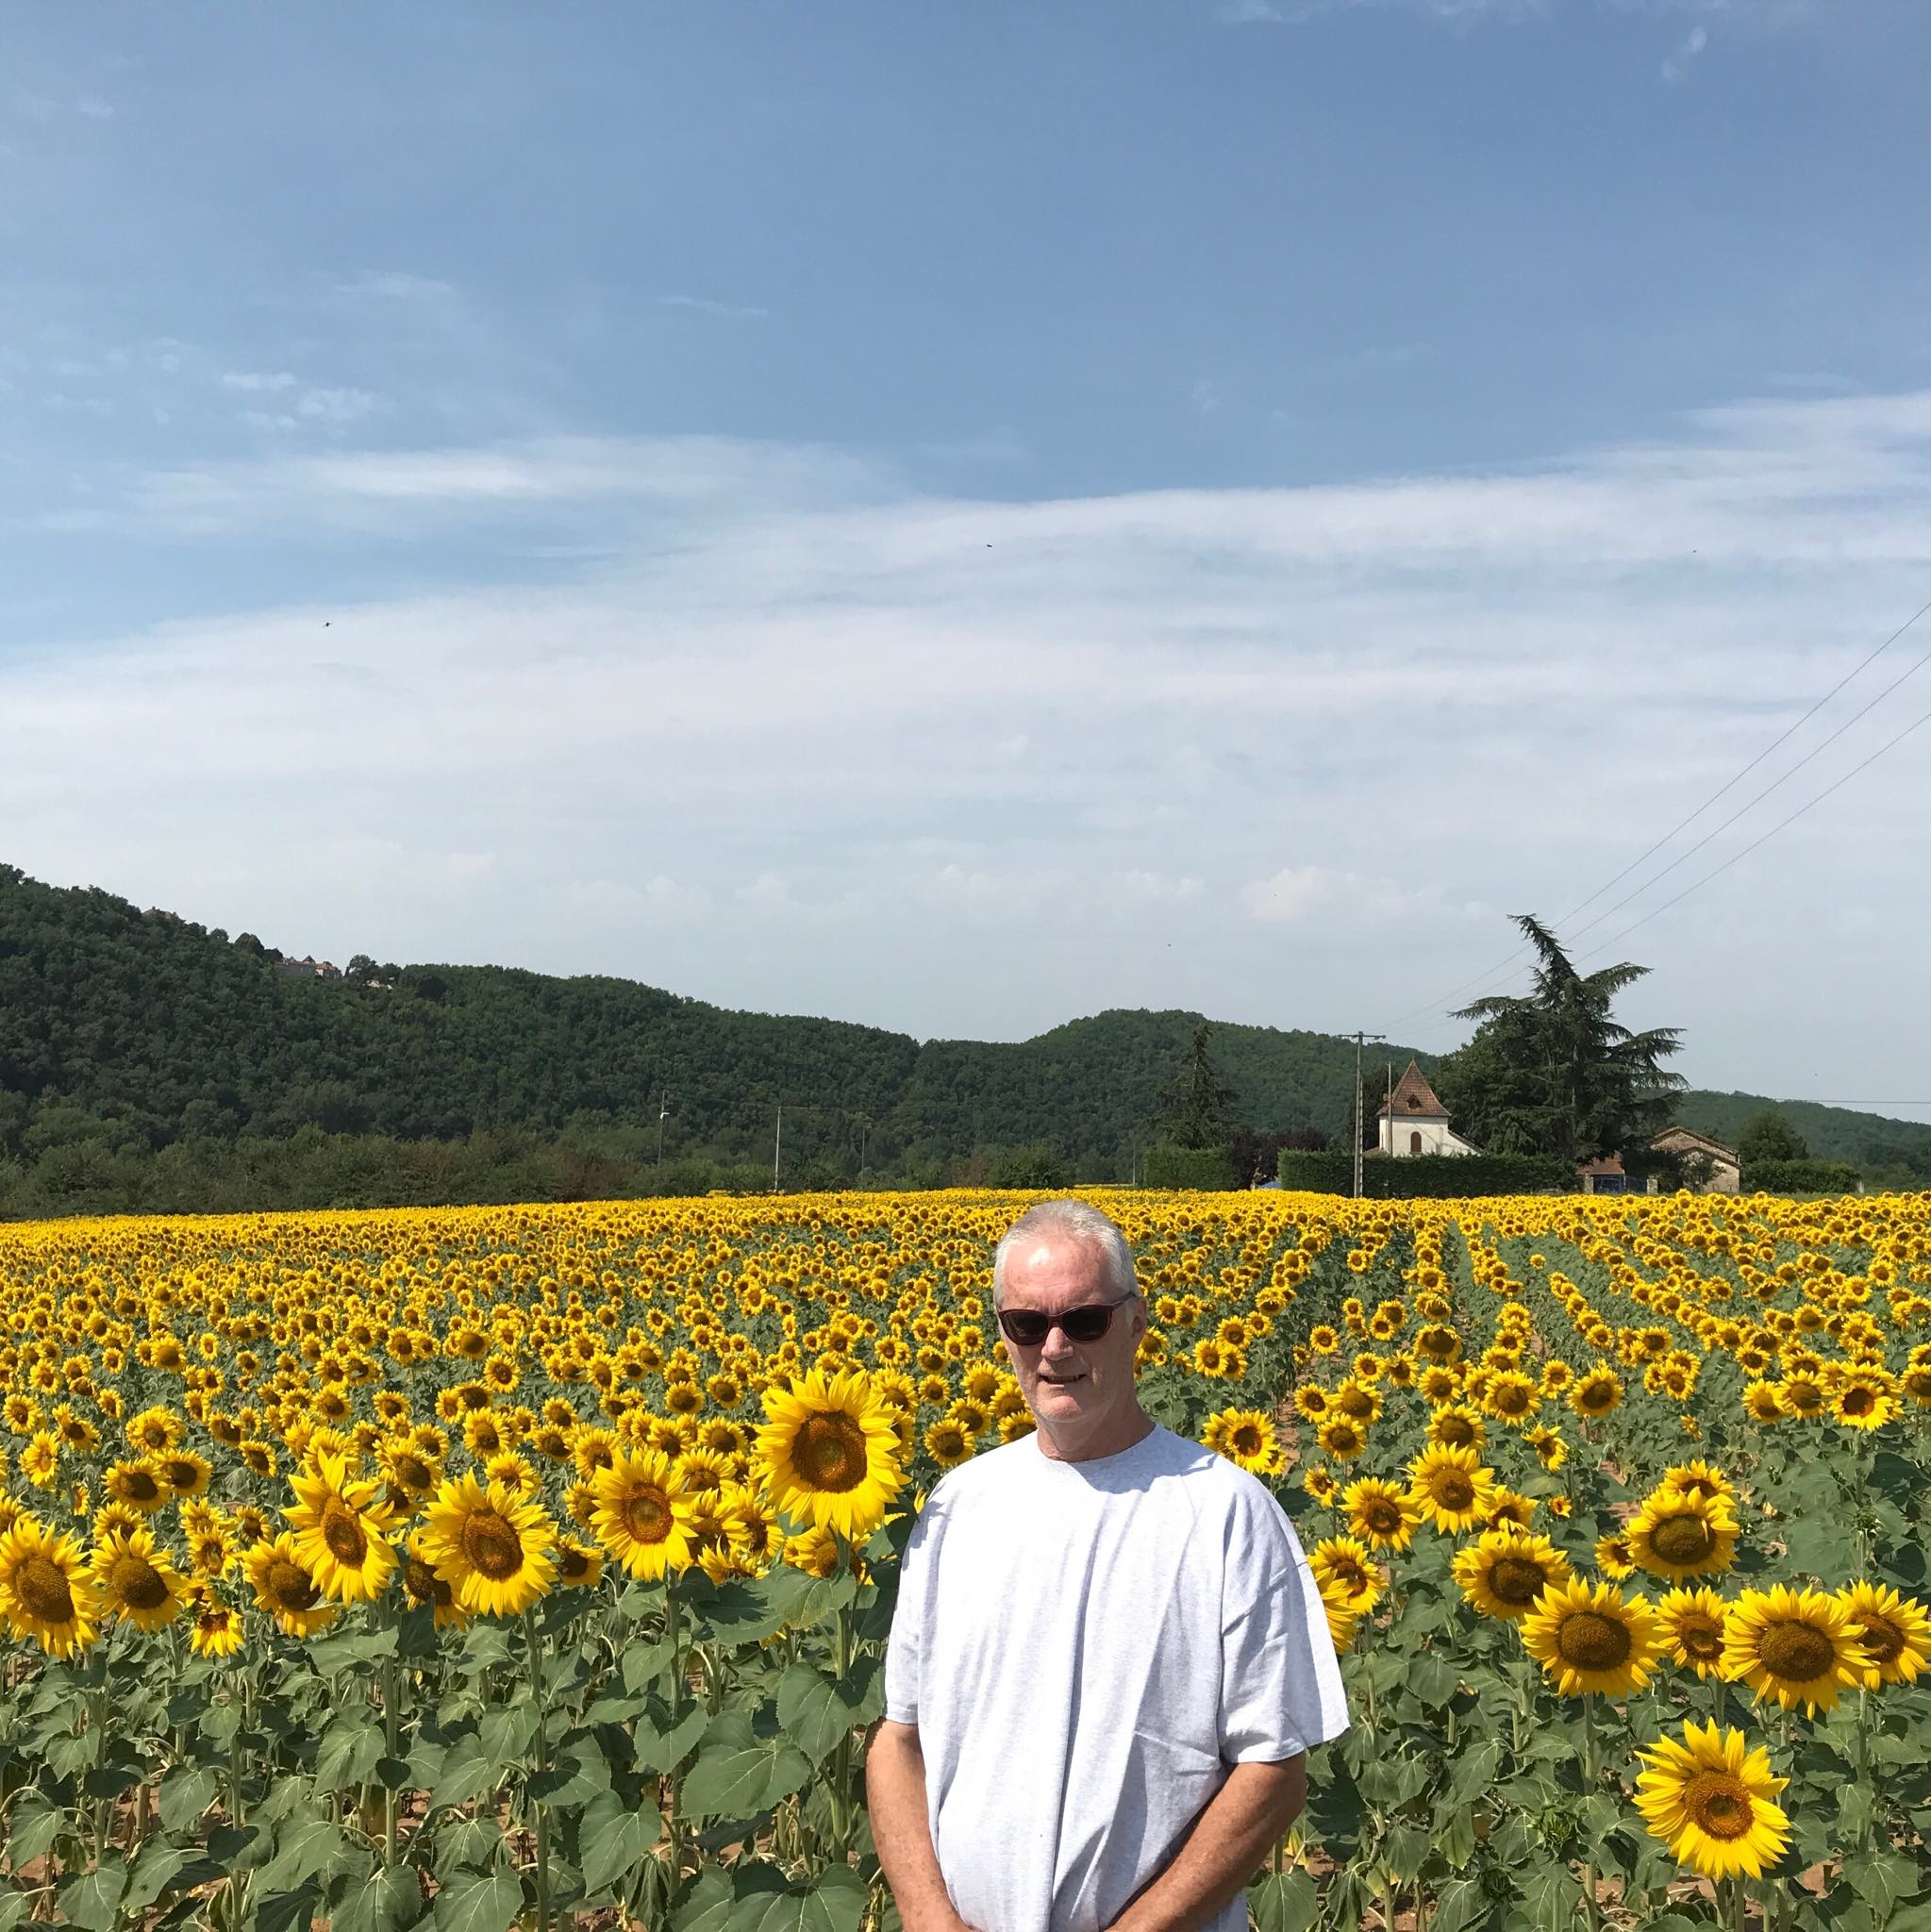 Profile photo of Bangkok 8 author surrounded by sunflowers in rural France.